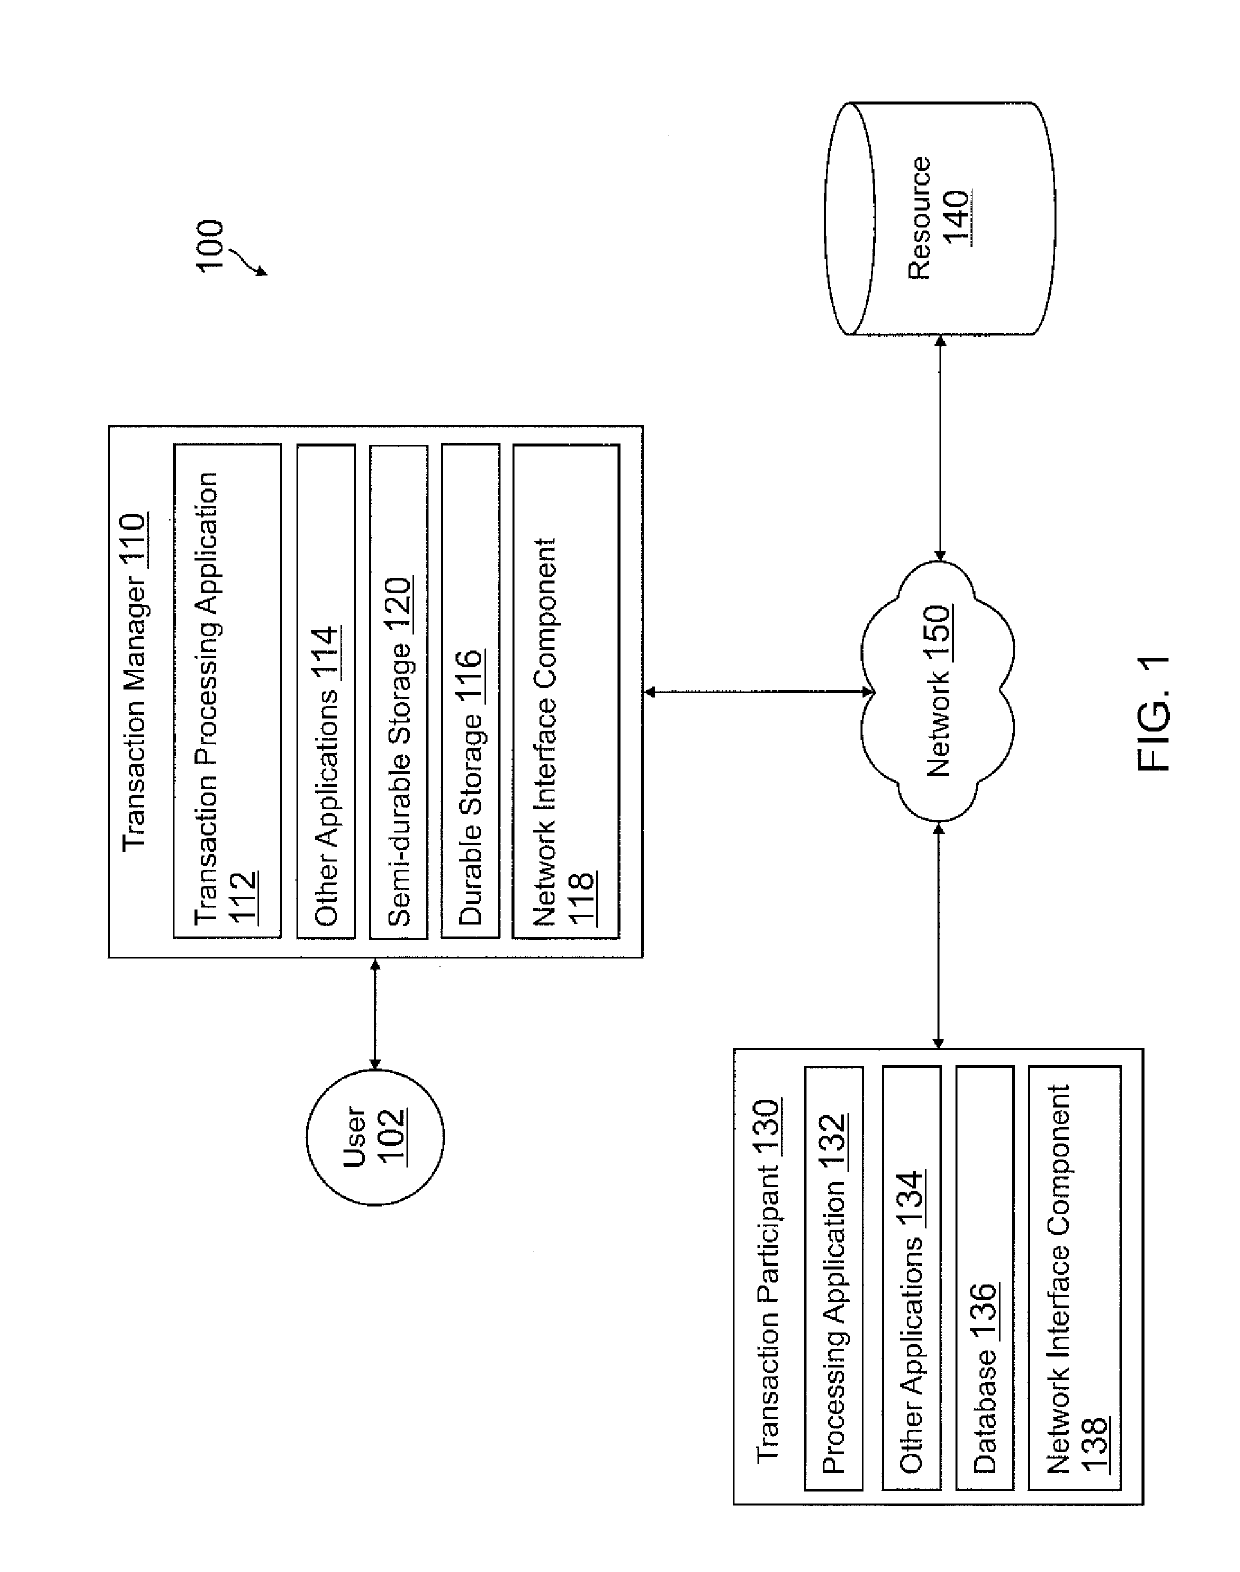 Systems and methods for semi-durable transaction log storage in two-phase commit protocol transaction processing